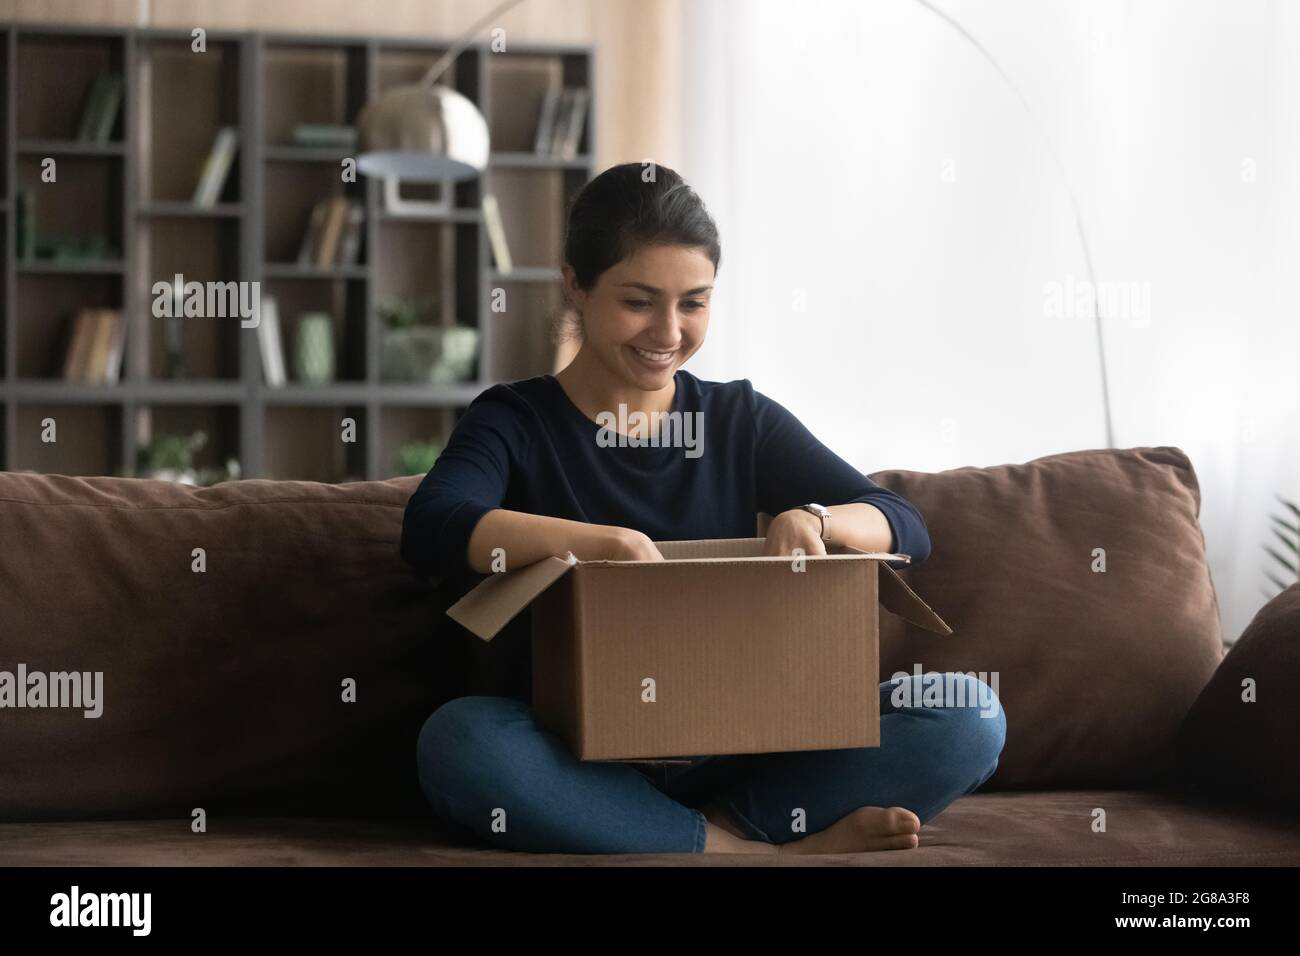 Excited Indian woman unpack box with internet order Stock Photo